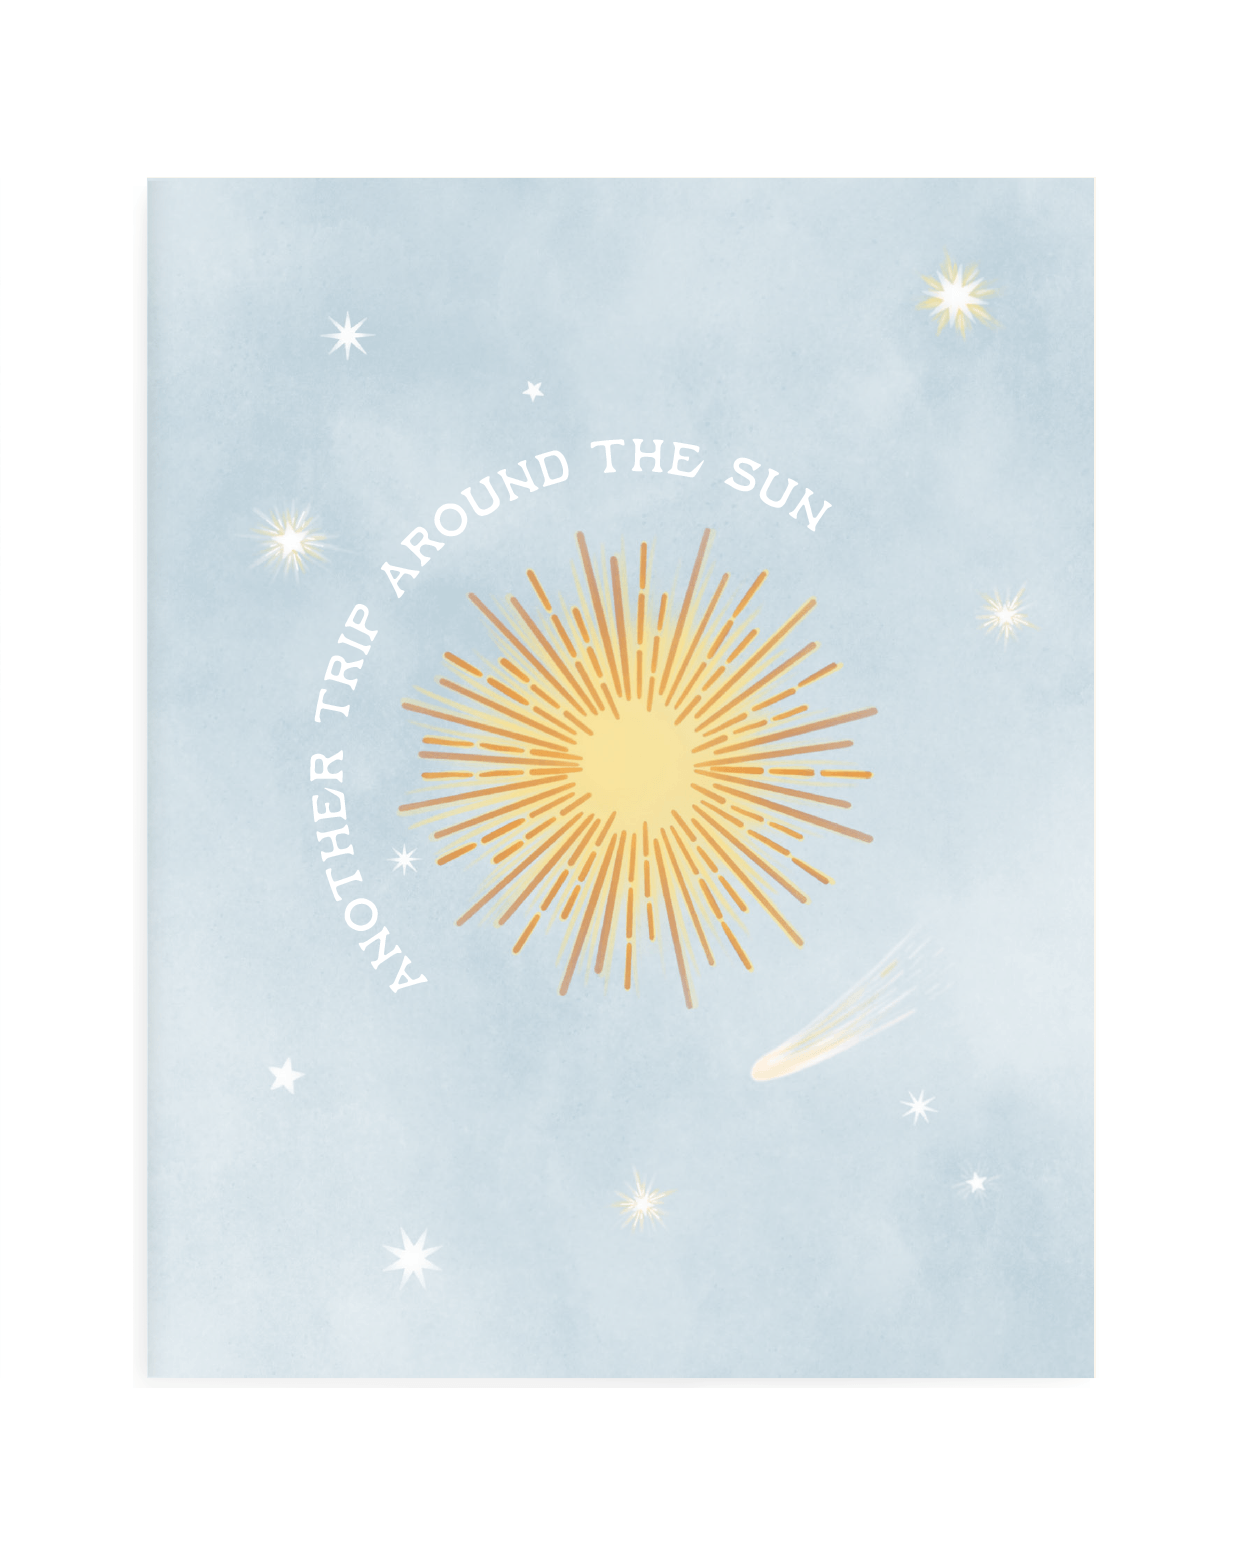 Greeting card with a pale blue background and scattered stars, a big yellow sun in the middle is circled by the words "Another Trip Around the Sun."